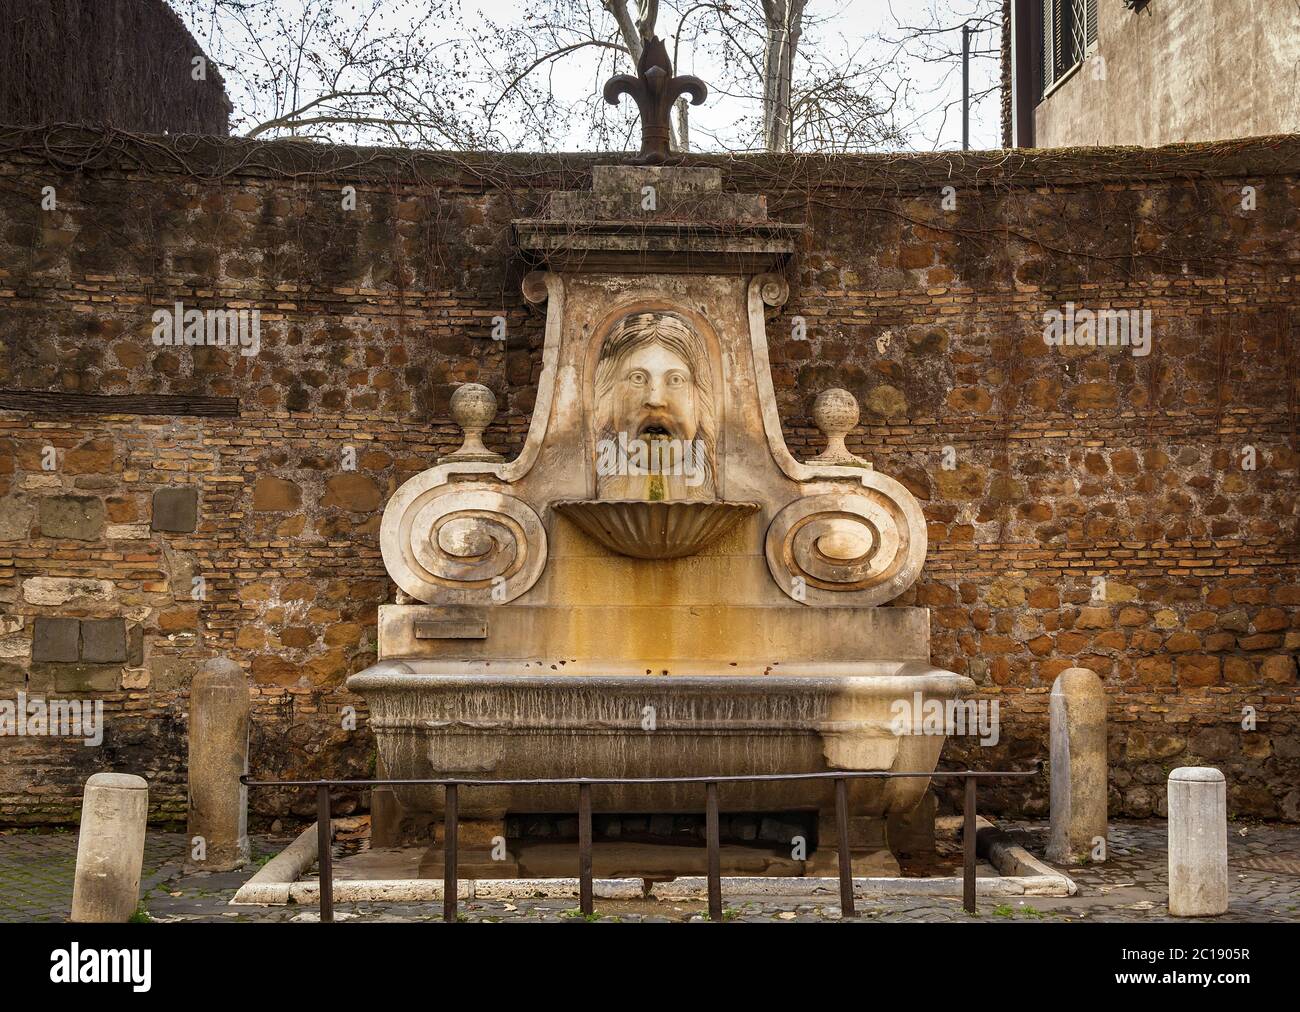 frontal view of the ancient Fountain of the mask (fontana del mascherone) in Rome, Italy Stock Photo